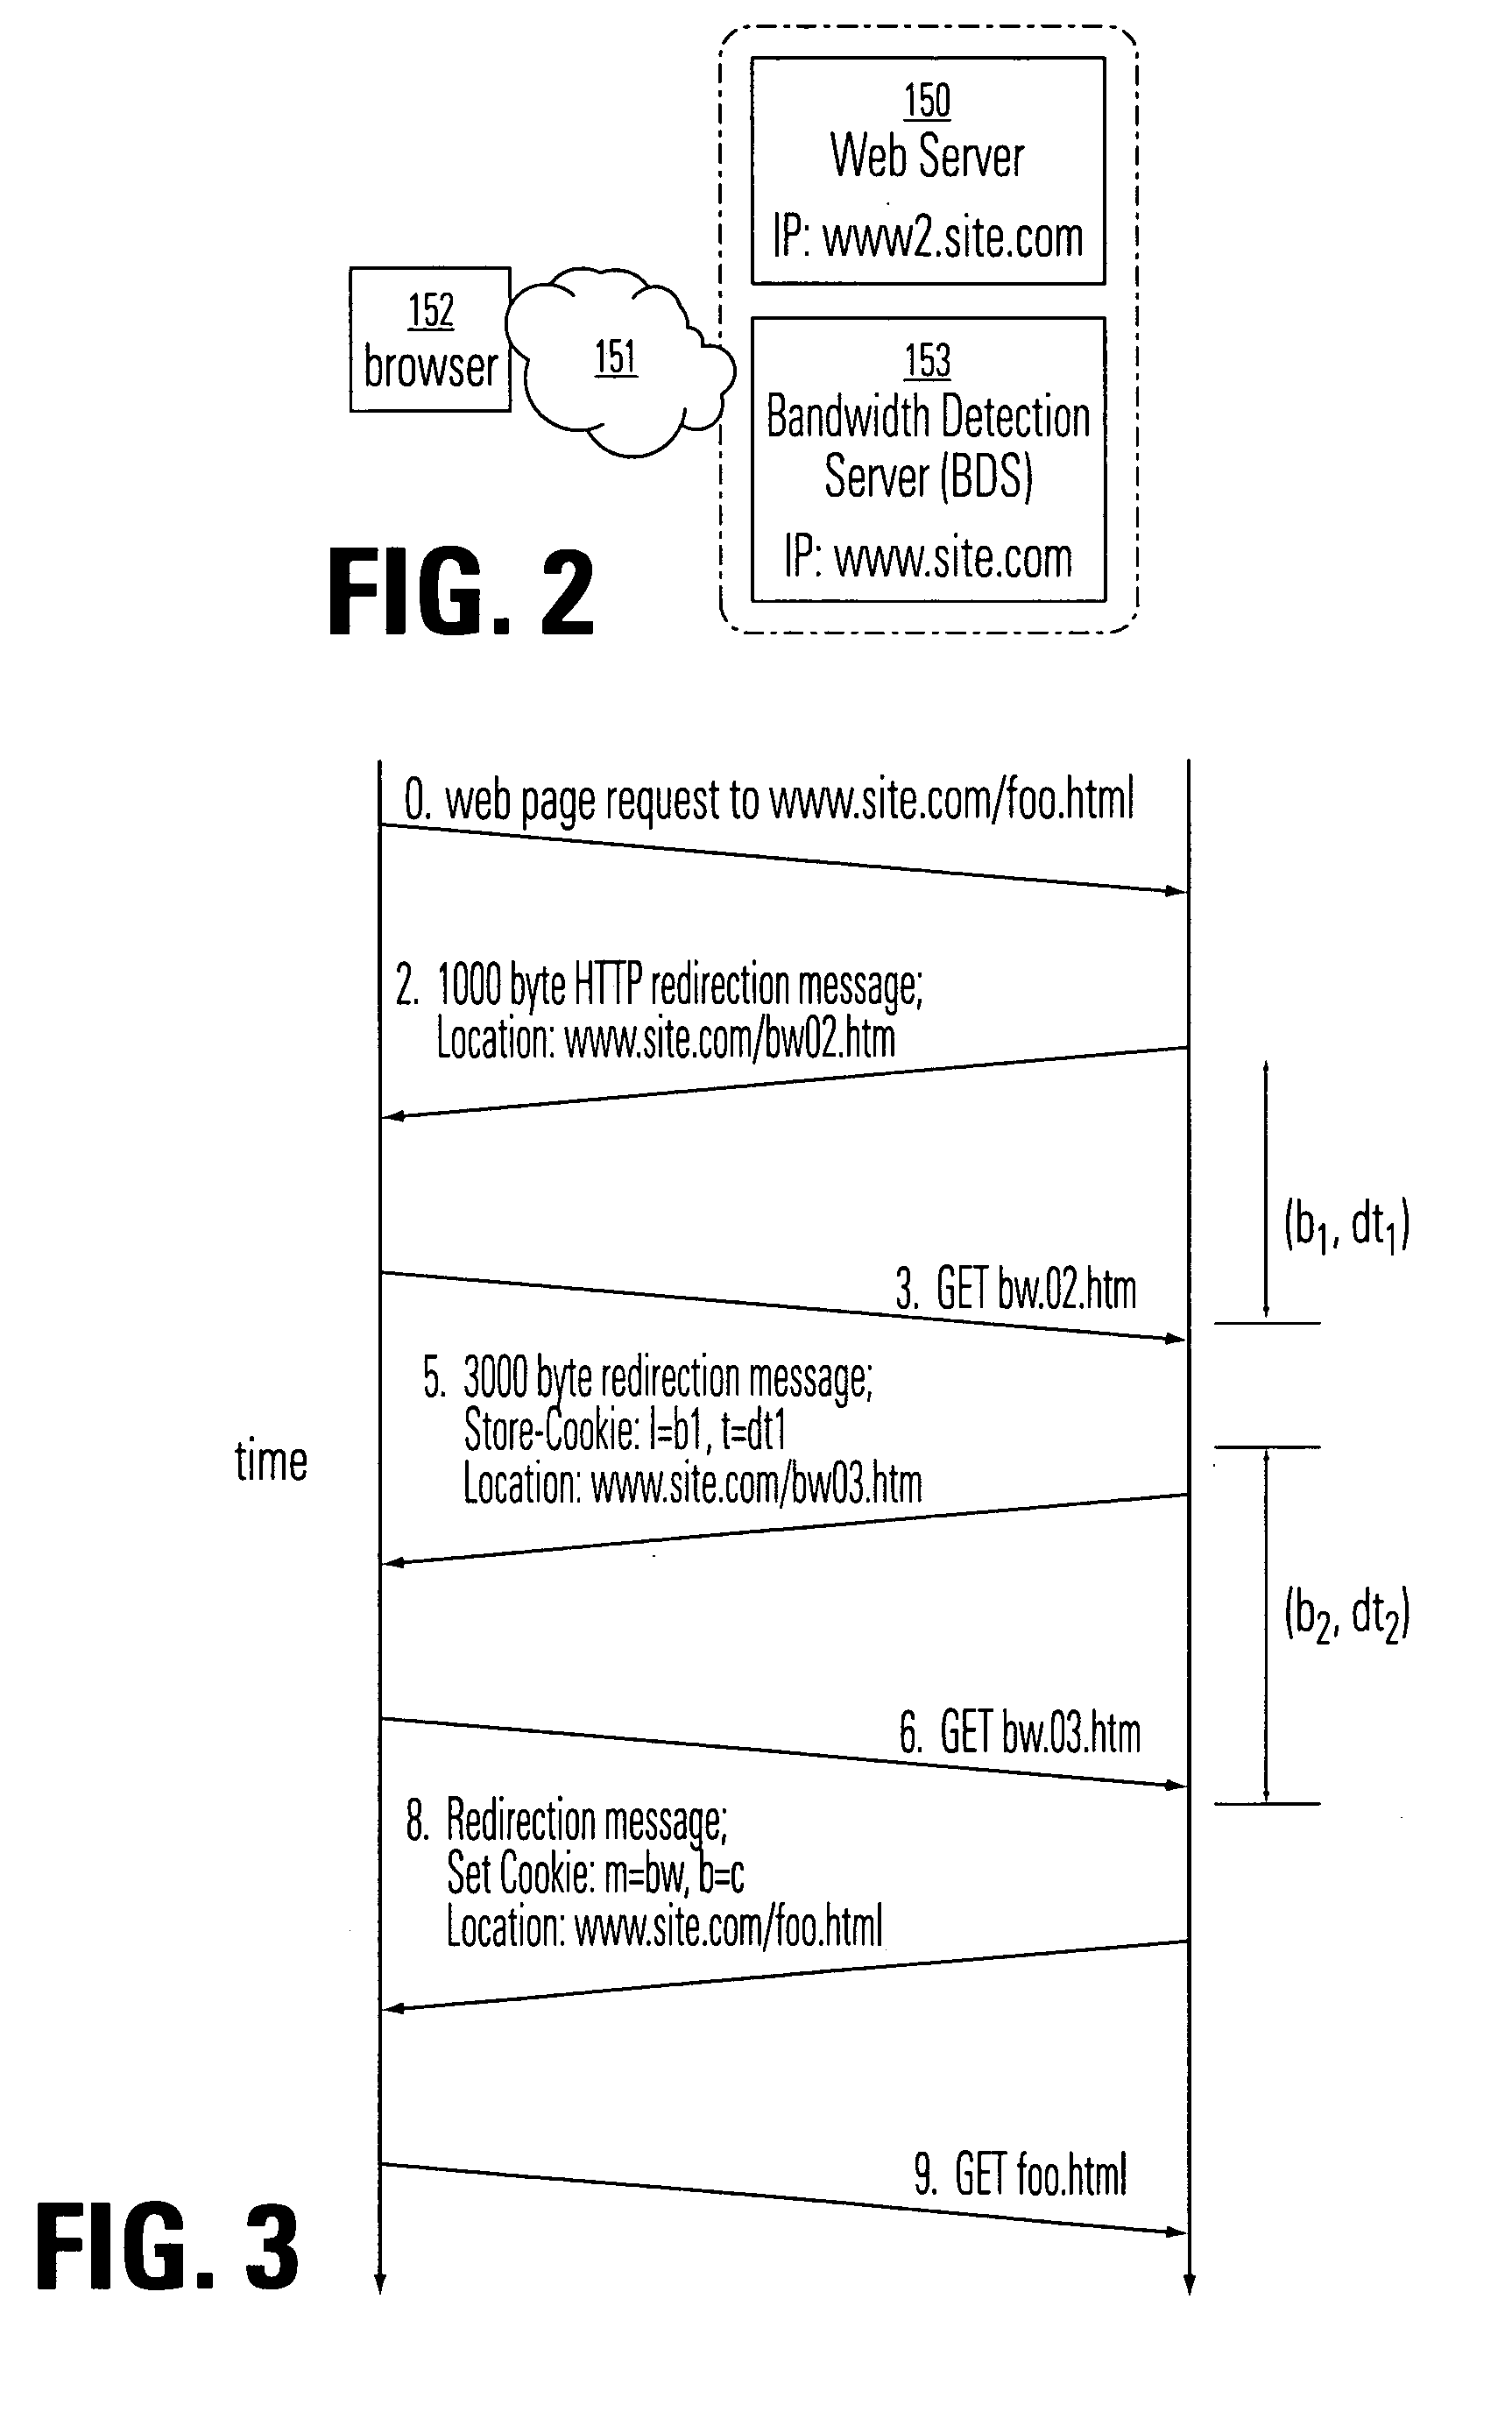 Bandwidth detection in a heterogeneous network with parallel and proxy modes